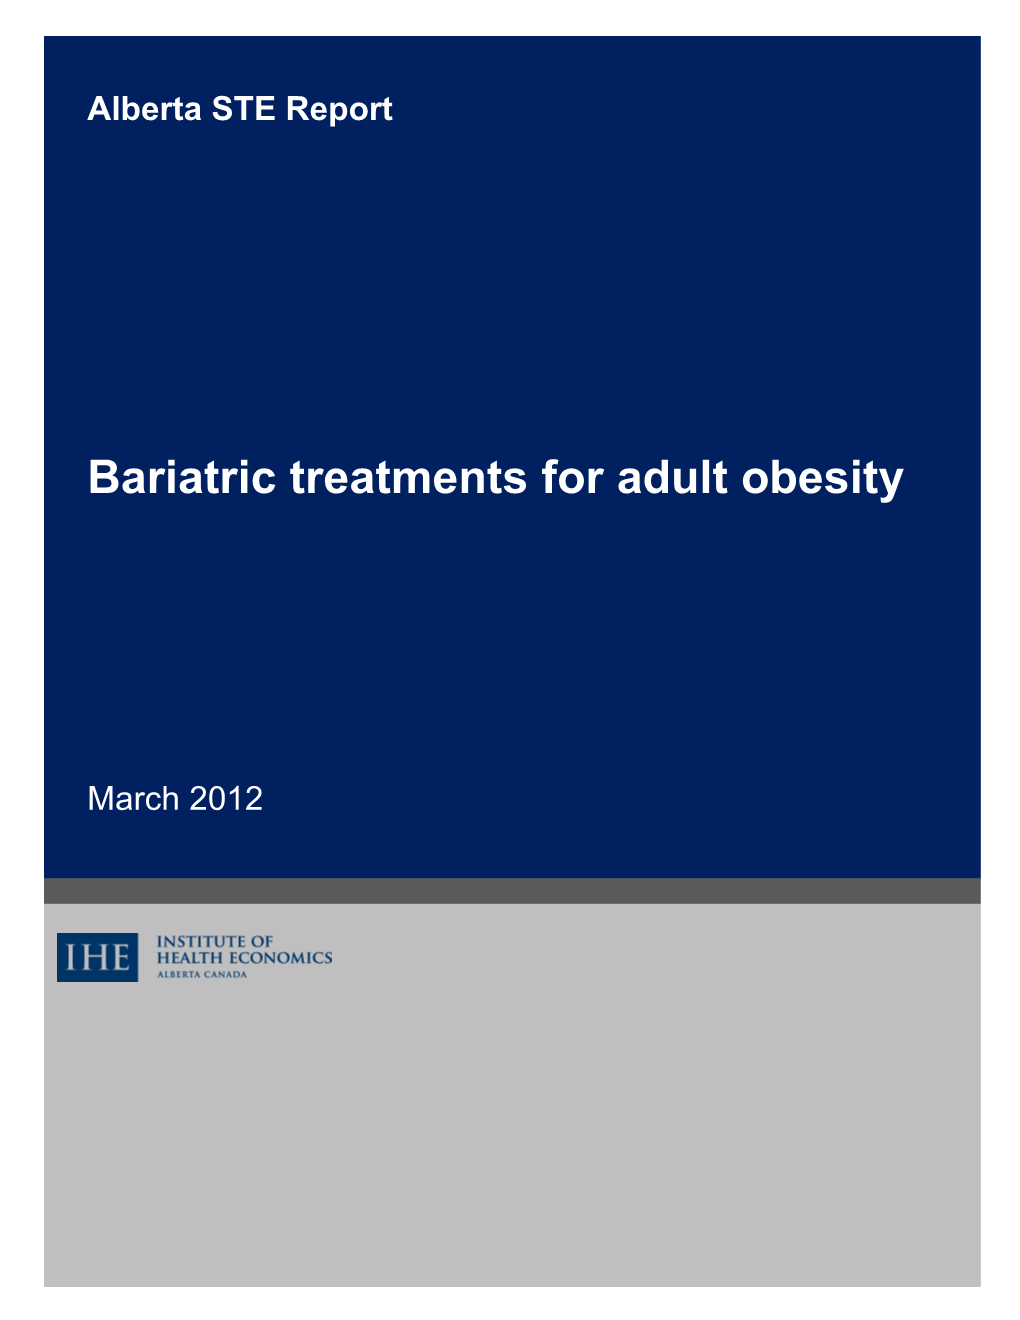 Bariatric Treatments for Adult Obesity